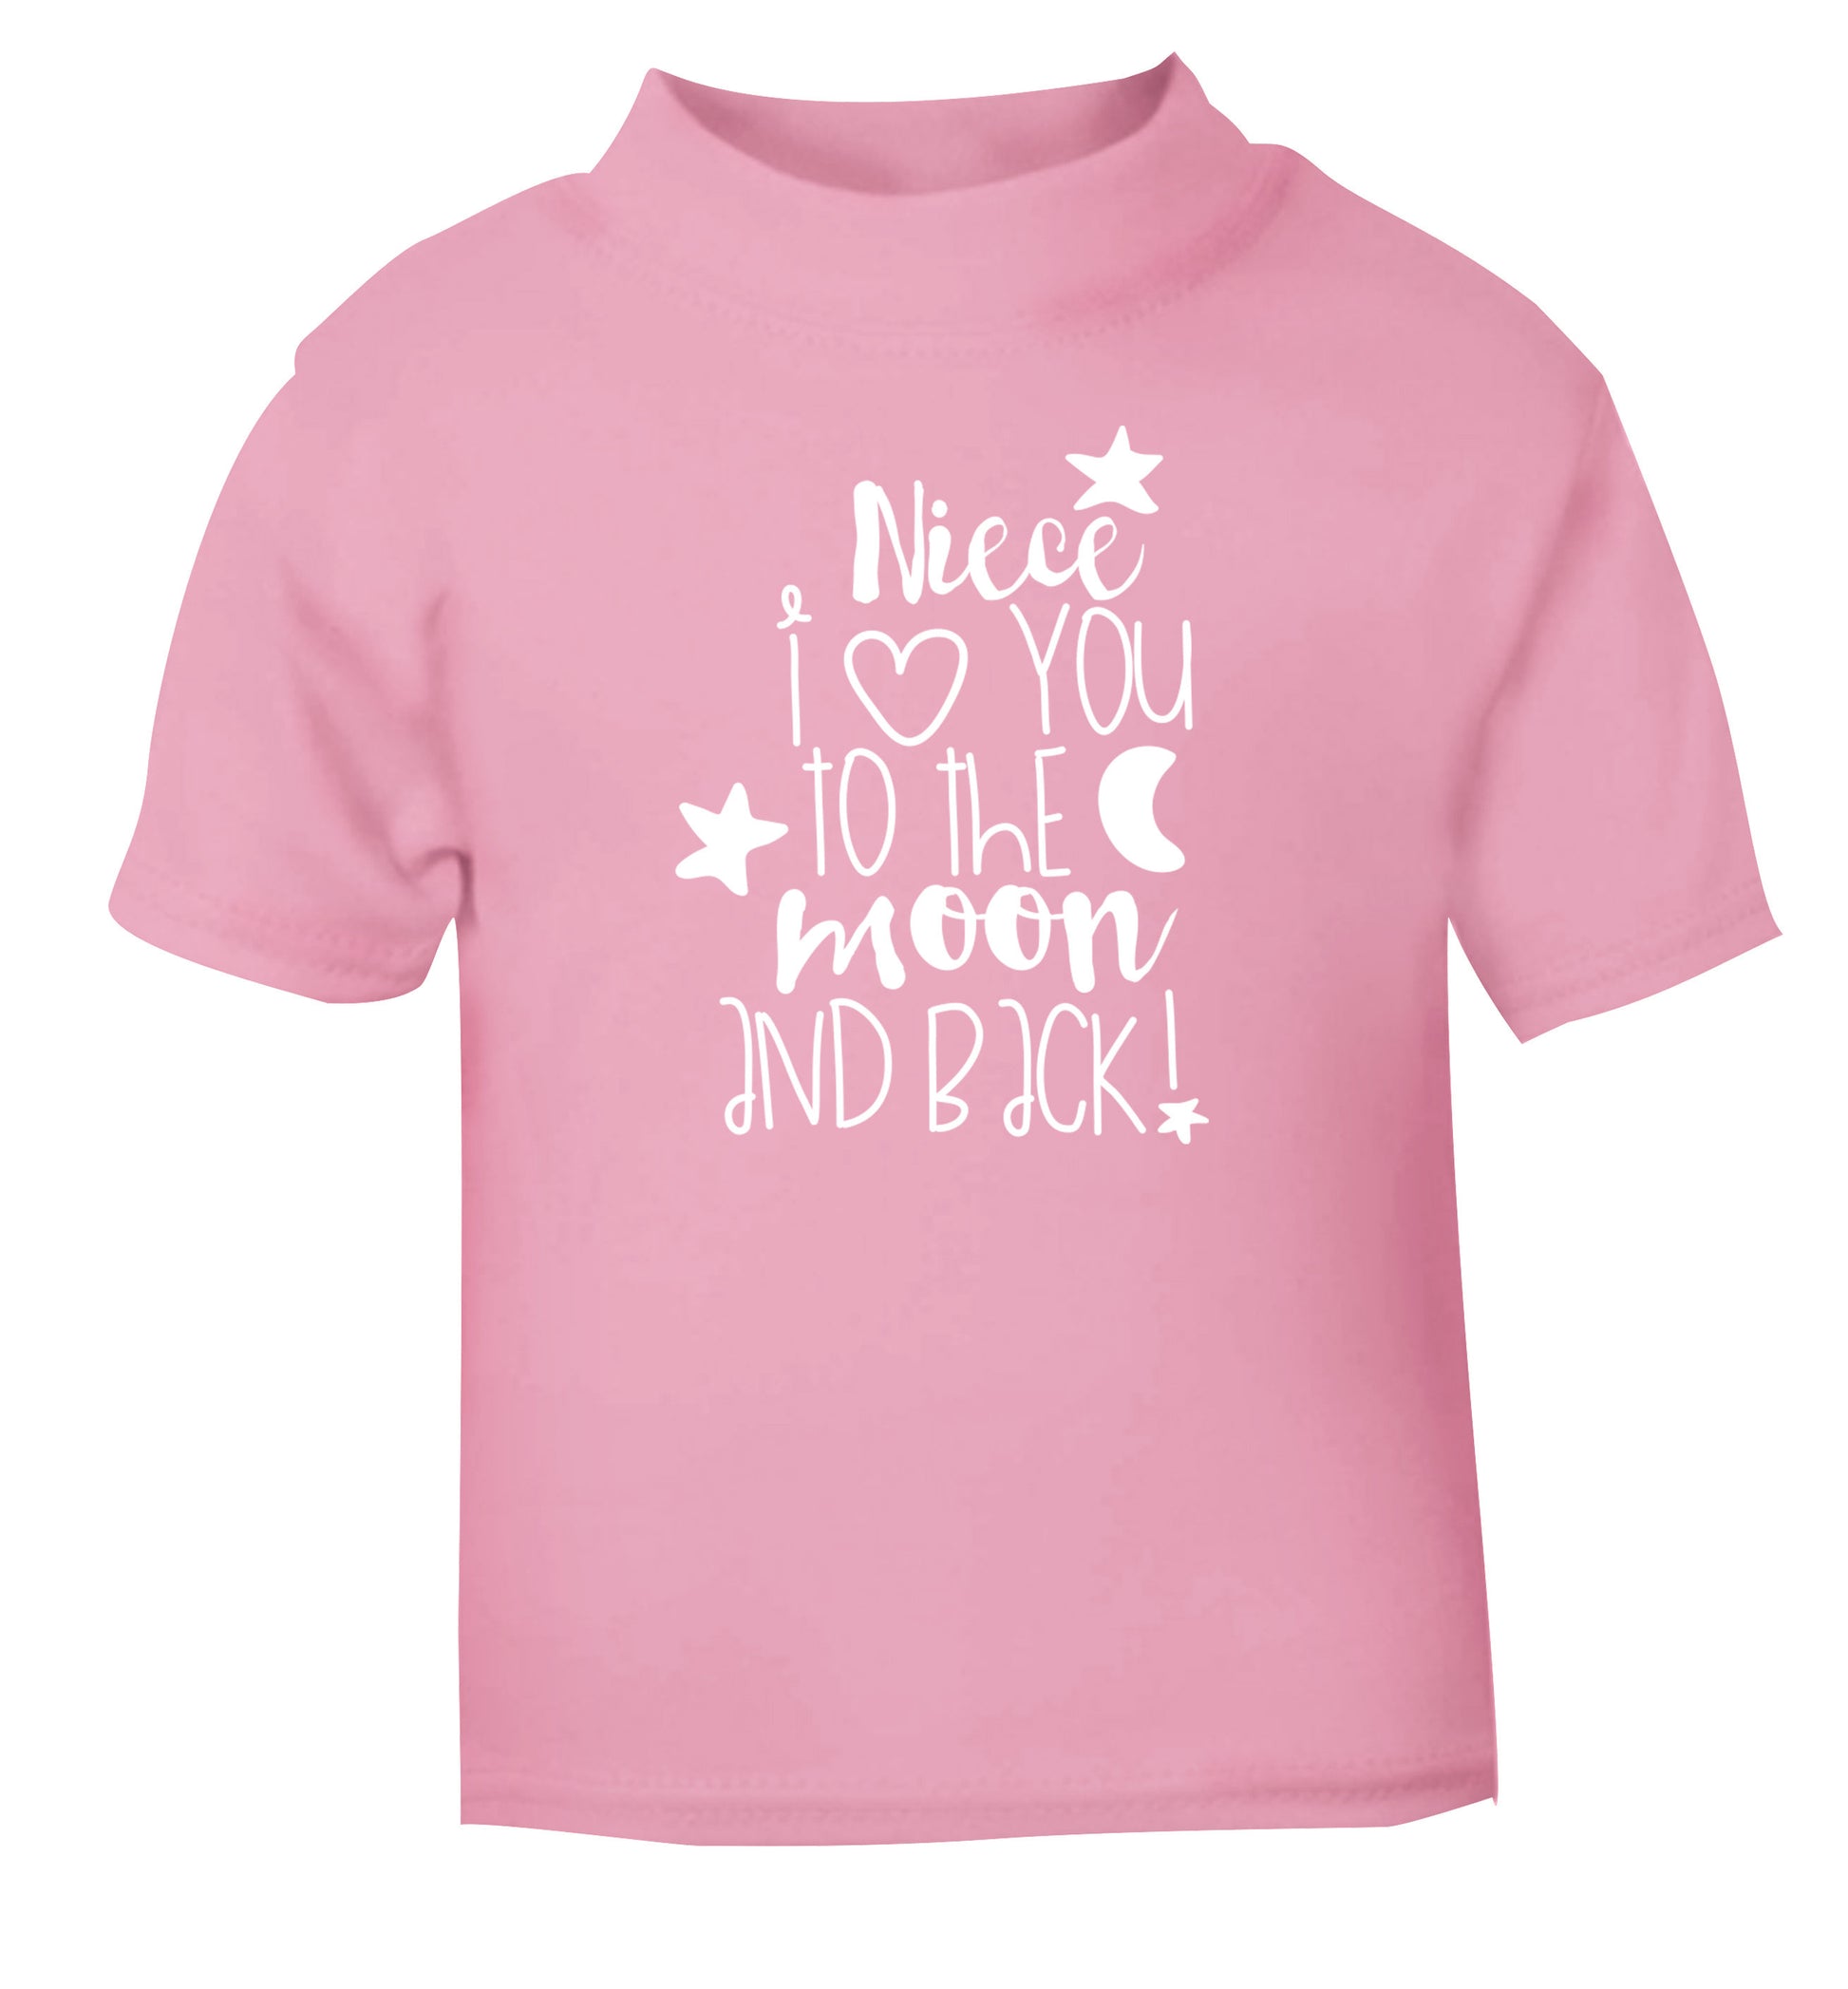 Niece I love you to the moon and back light pink Baby Toddler Tshirt 2 Years